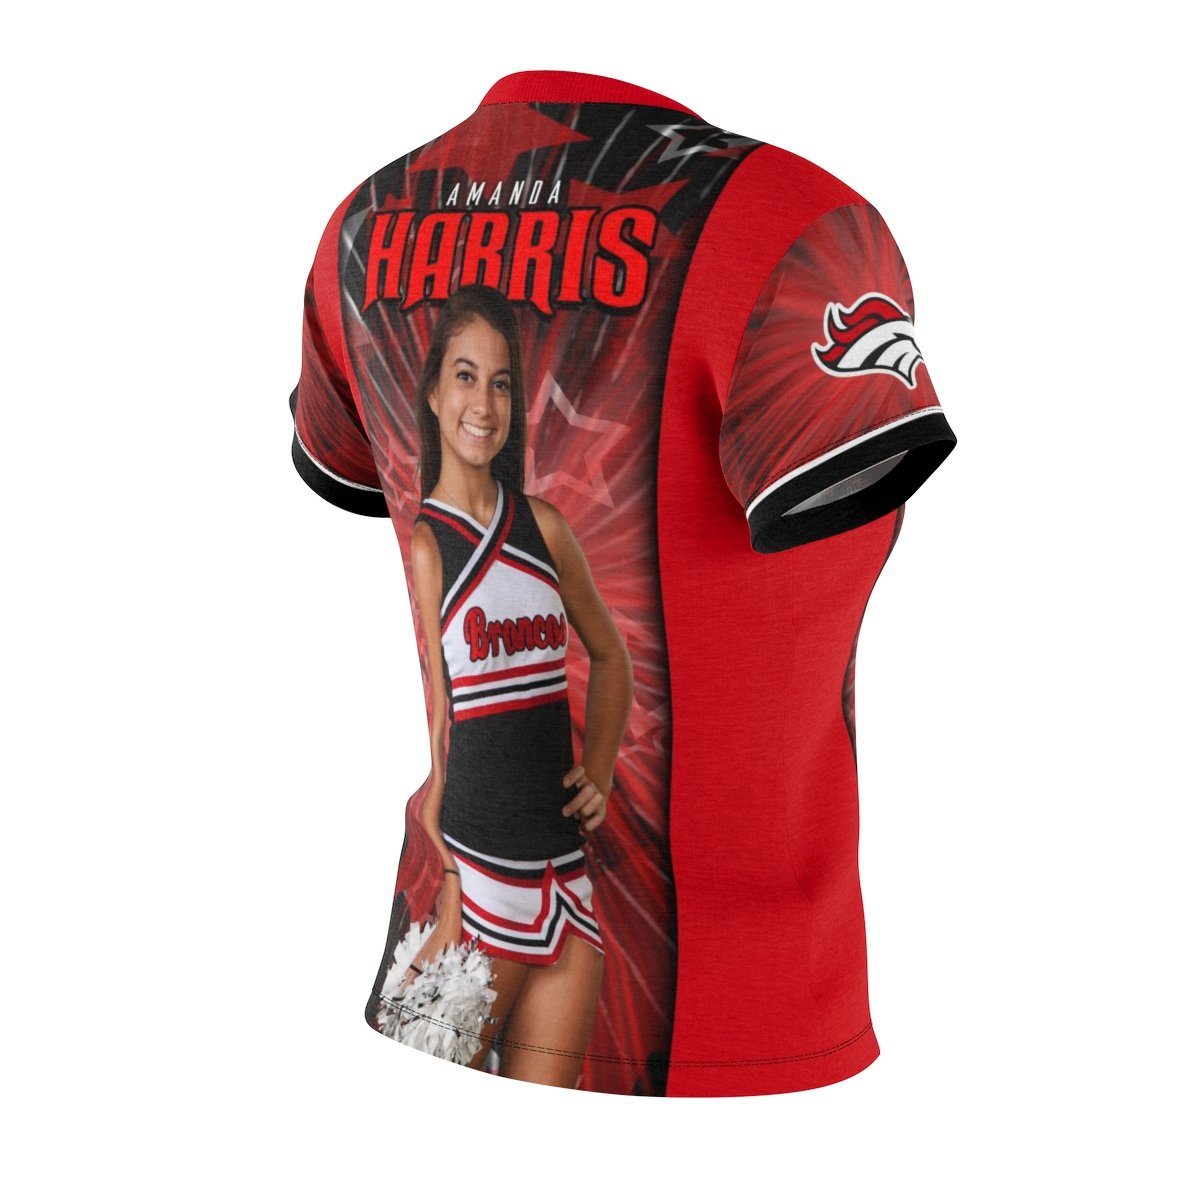 Spirit - V.1 - Extreme Sportswear Women's Cut & Sew Template-Photoshop Template - Photo Solutions